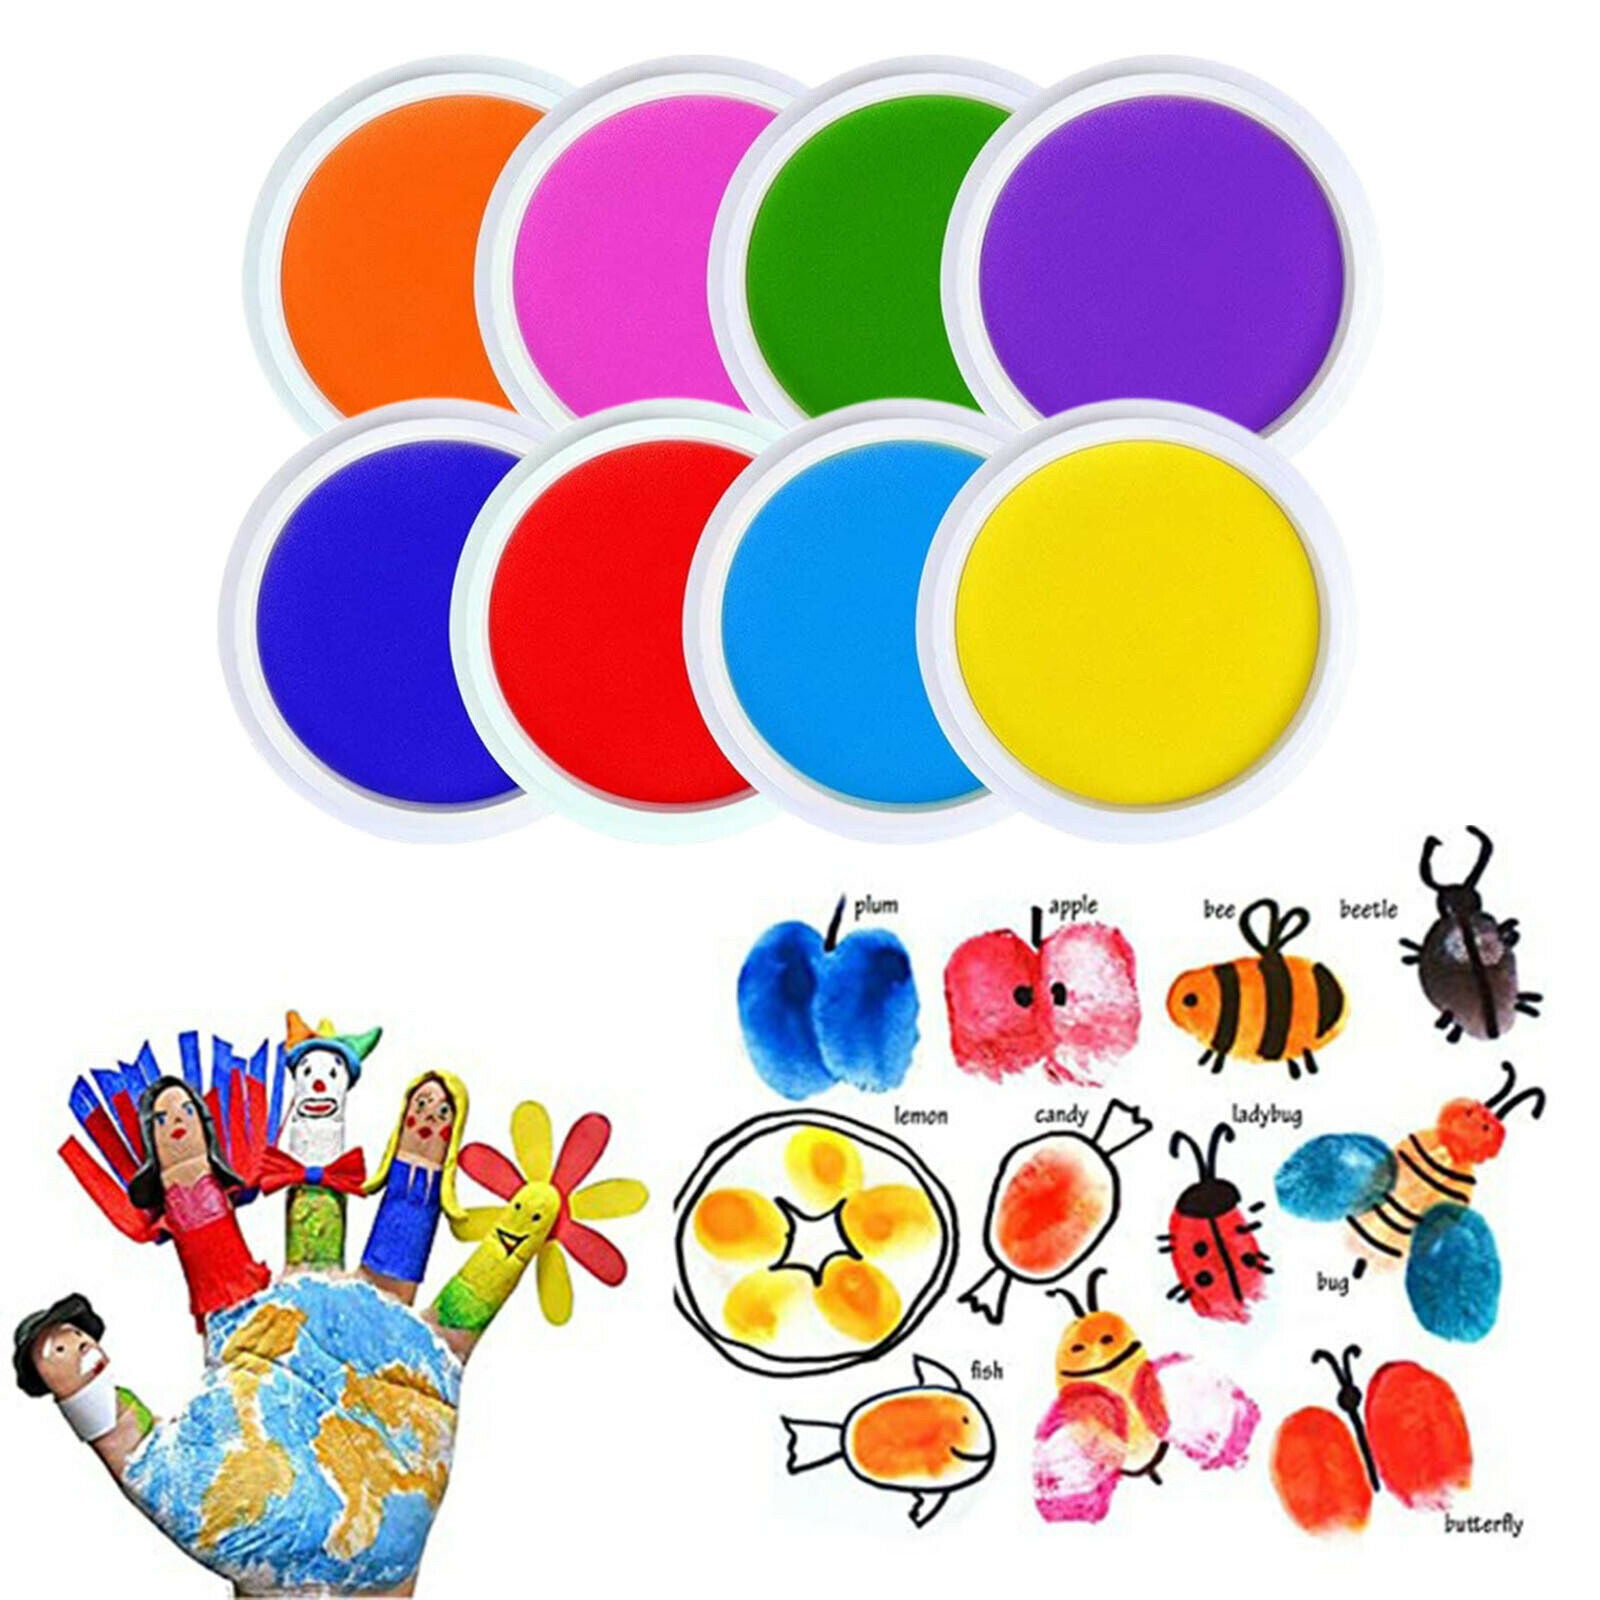 Round Ink Pads Non Toxic DIY Set of 8 Vivid for Rubber Stamps Gift Teachers